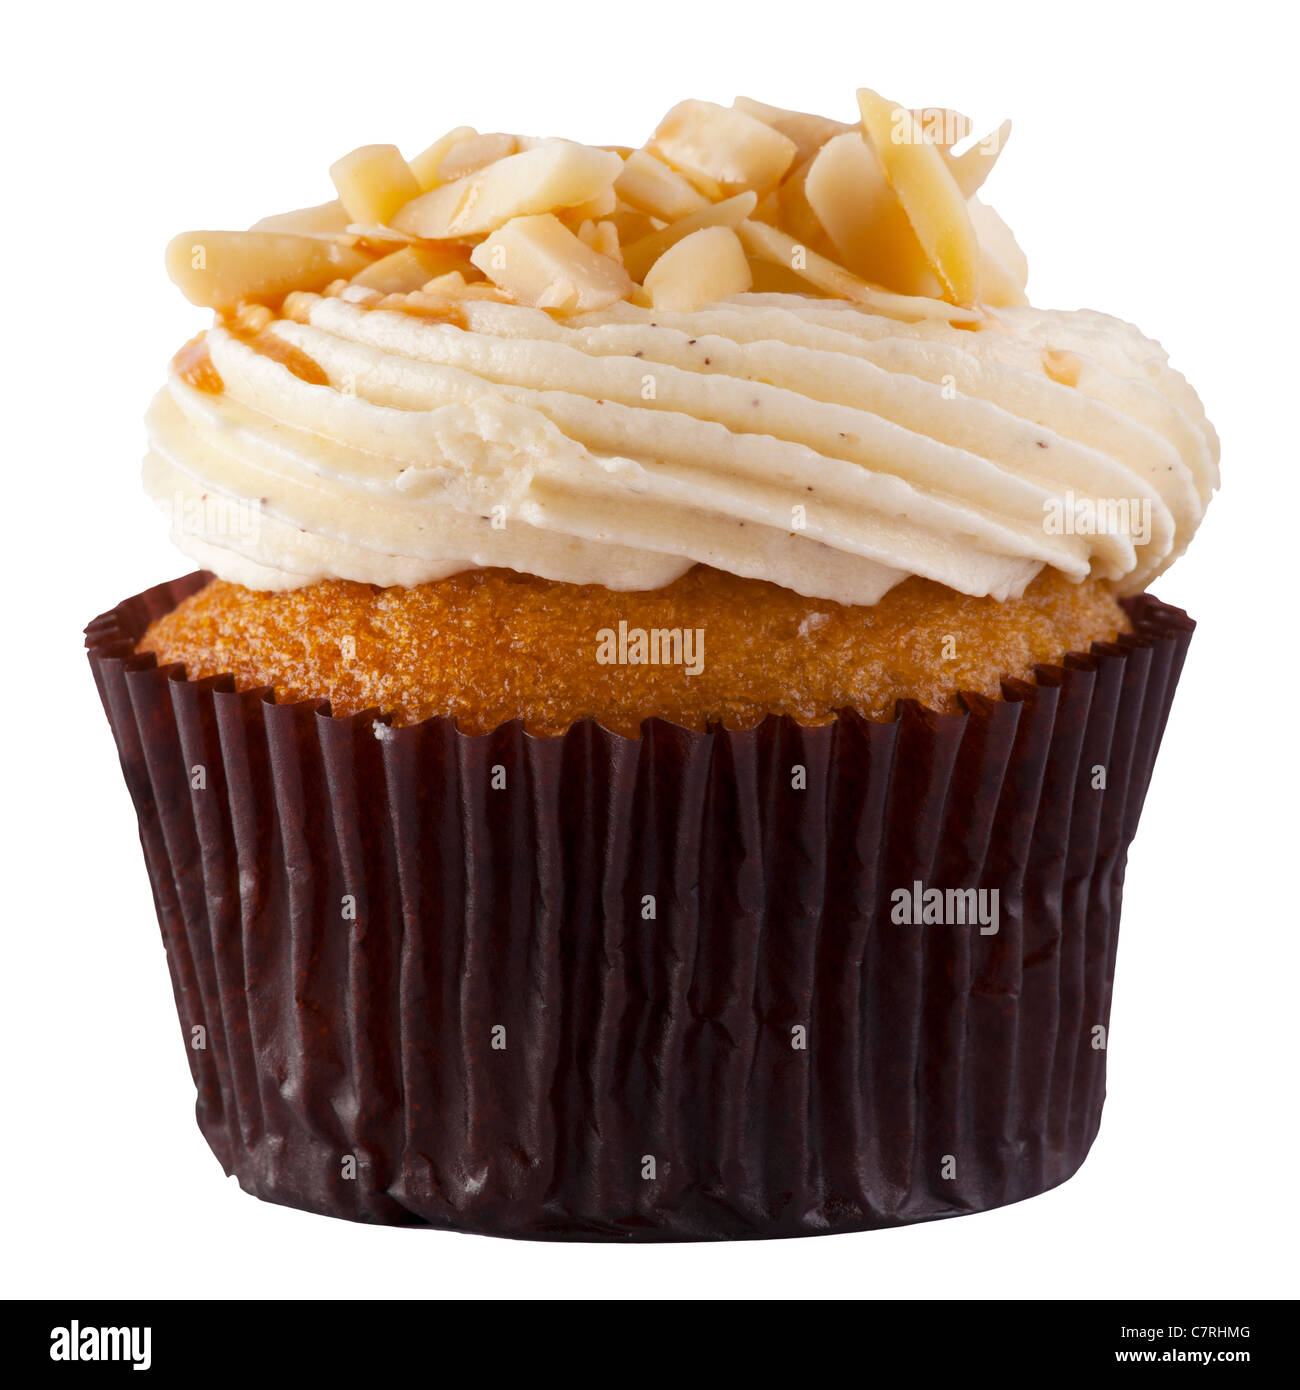 A Luxury Cup Cake with almond chip and cream topping Stock Photo